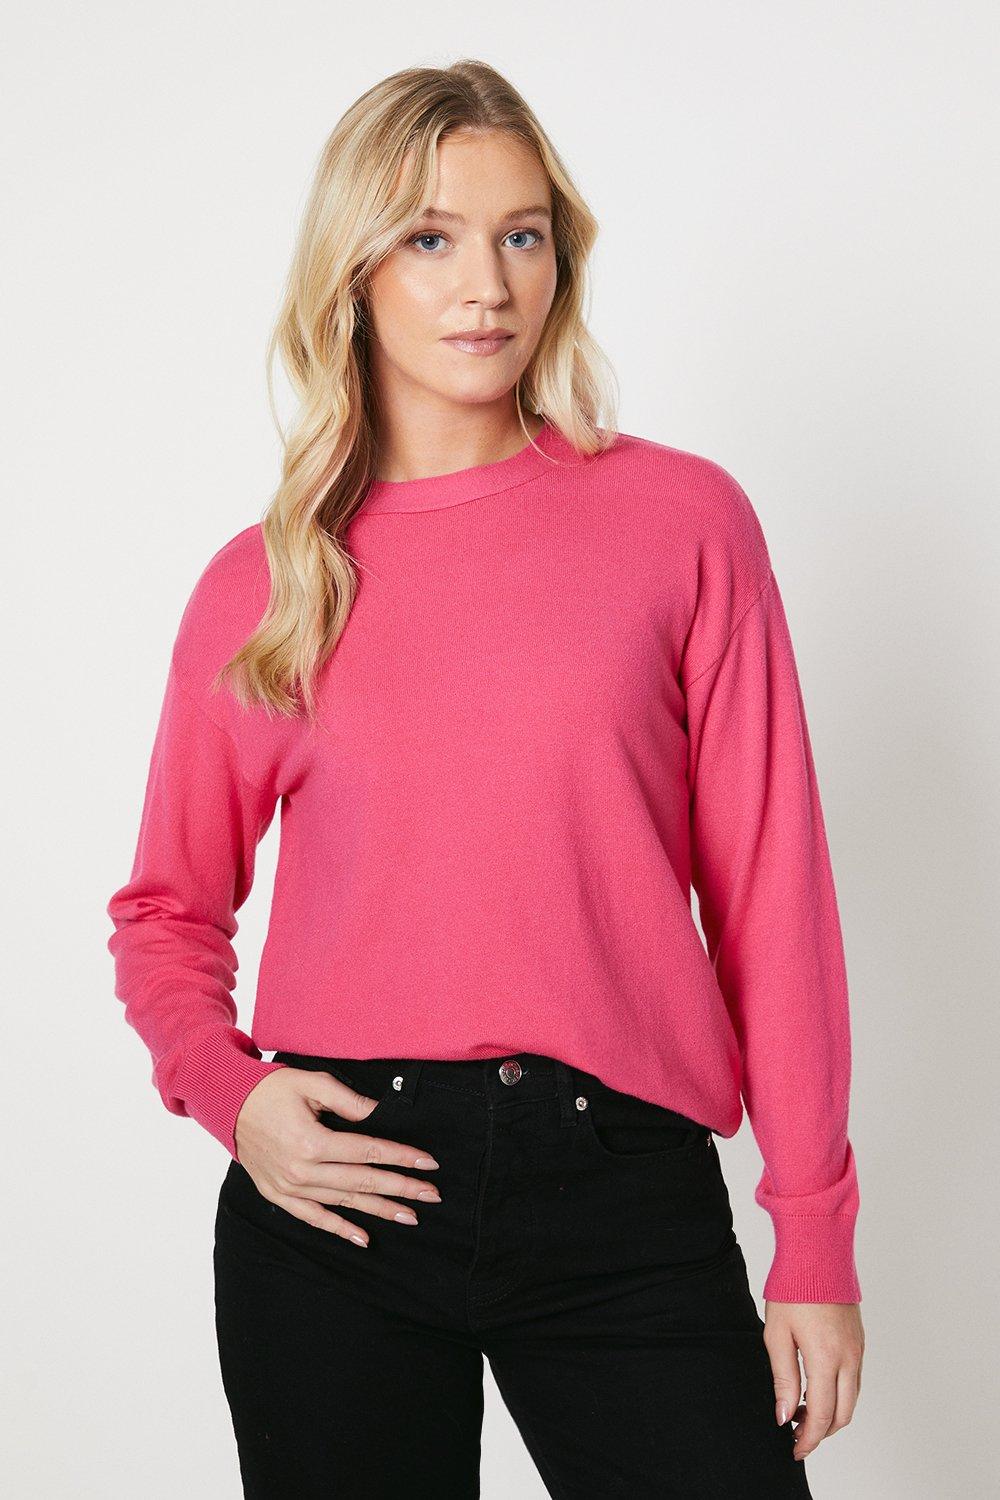 Women's Bow Back Knitted Jumper - pink - L